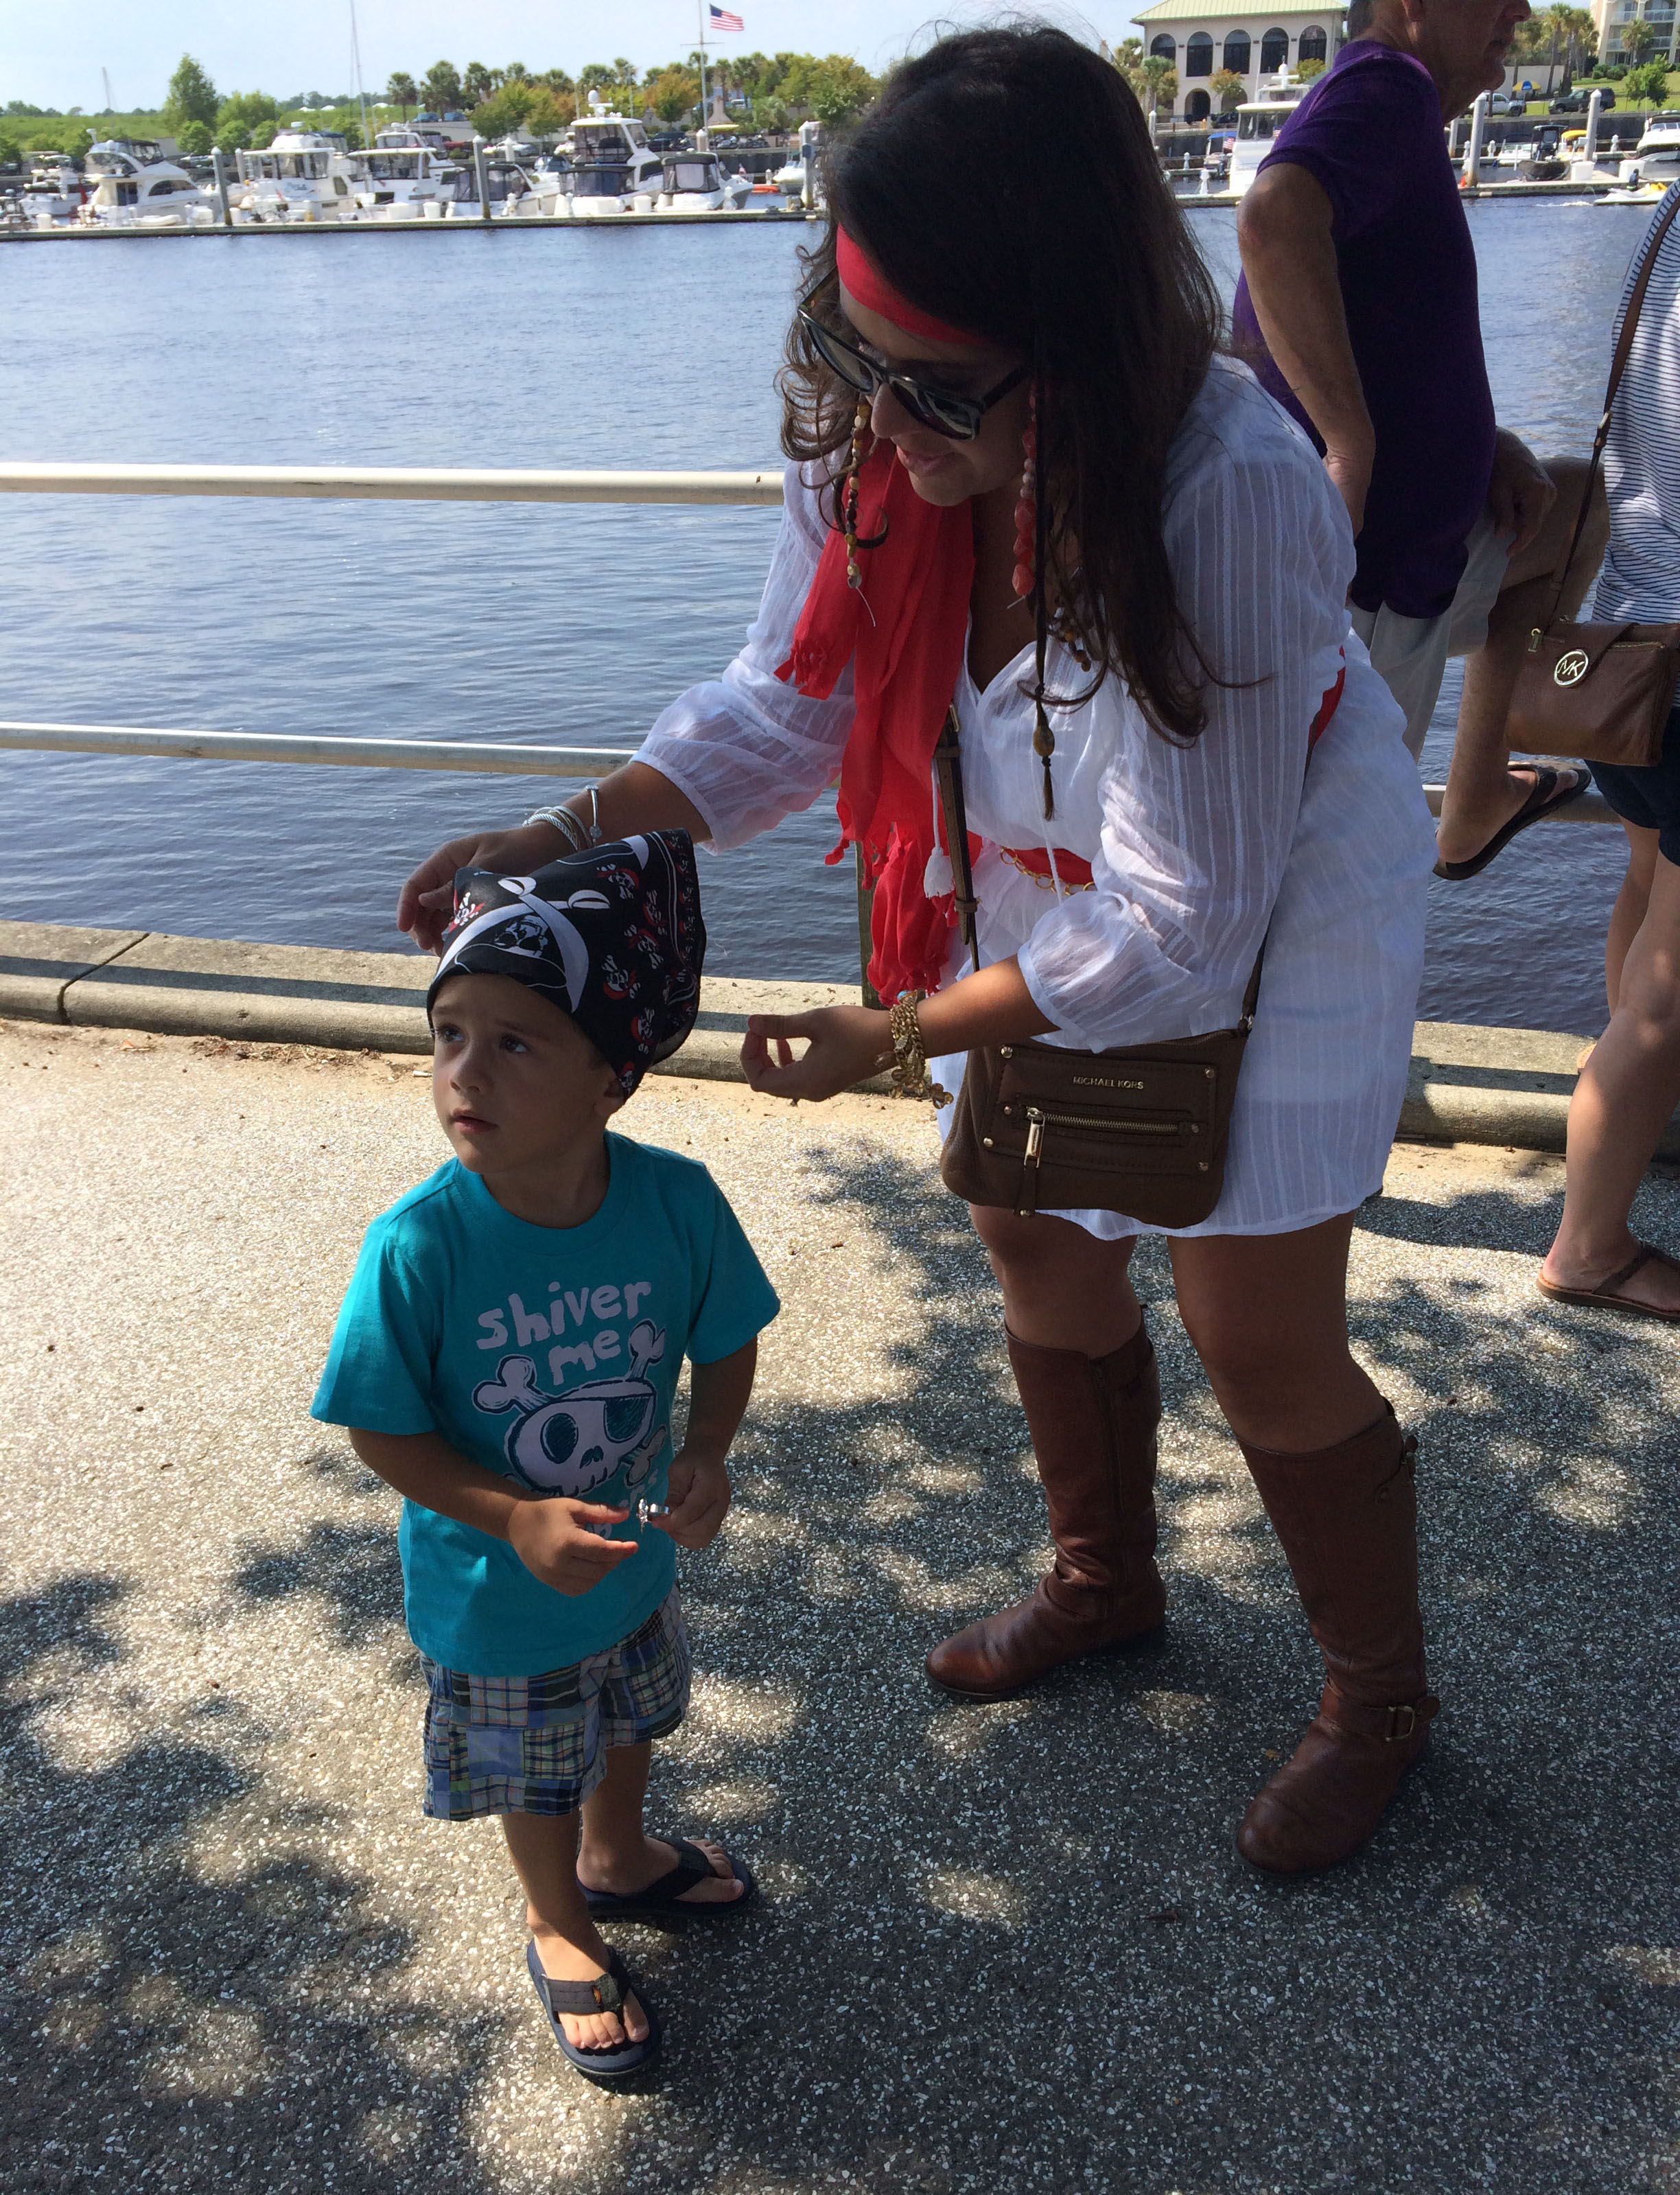 Sidney tying on the bandana of a soon-to-be pirate.